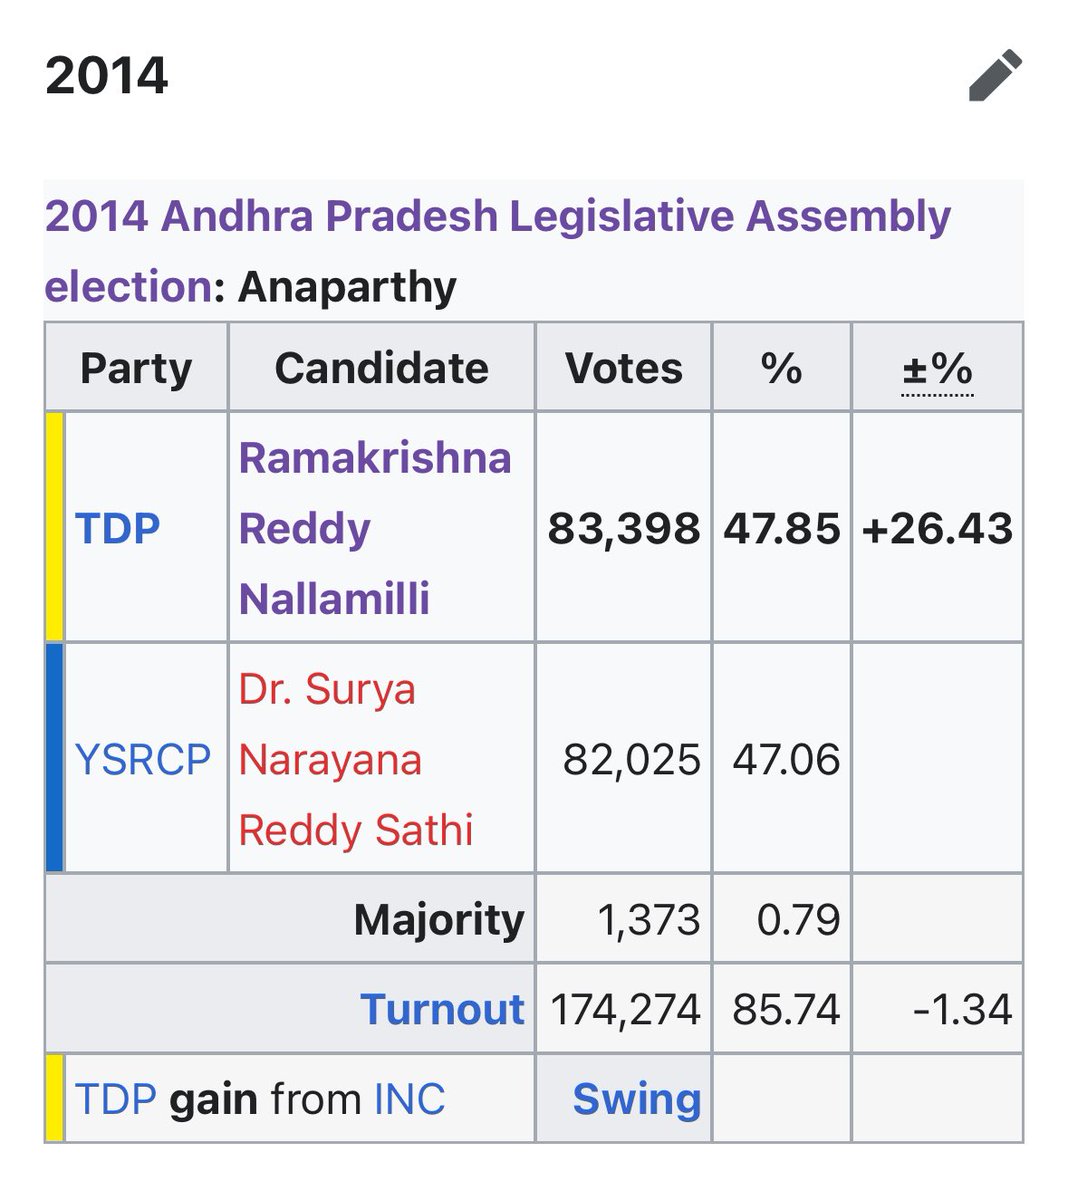 Alliance is already very strong in Rajahmundry Urban and Rural, and alliance has an edge over YCP in Rajanagaram and Nidadavole, both YCP and alliance are having an equal presence in Kovvur and Gopalapuram and therefore, Anaparthy is the deciding factor in this Loksabha segment!!…